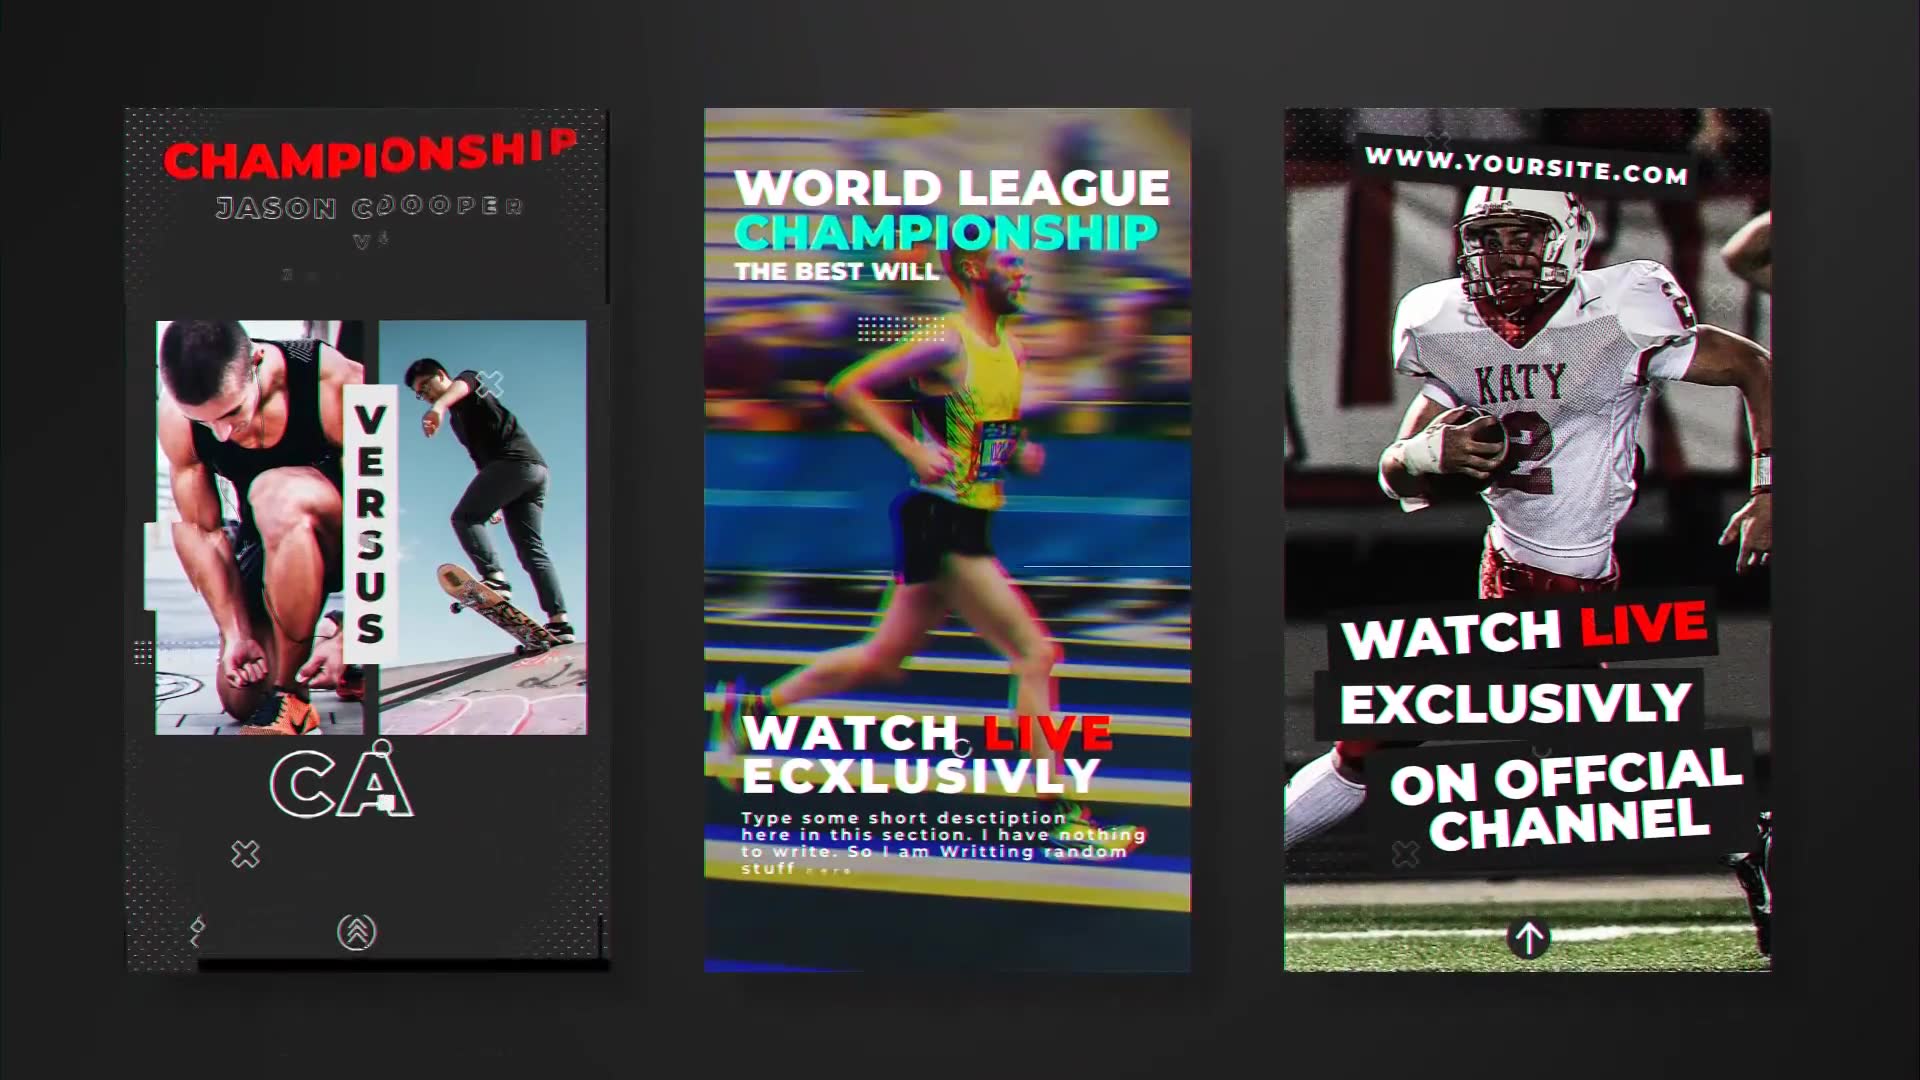 Sports Instagram Stories - Download Videohive 23100349